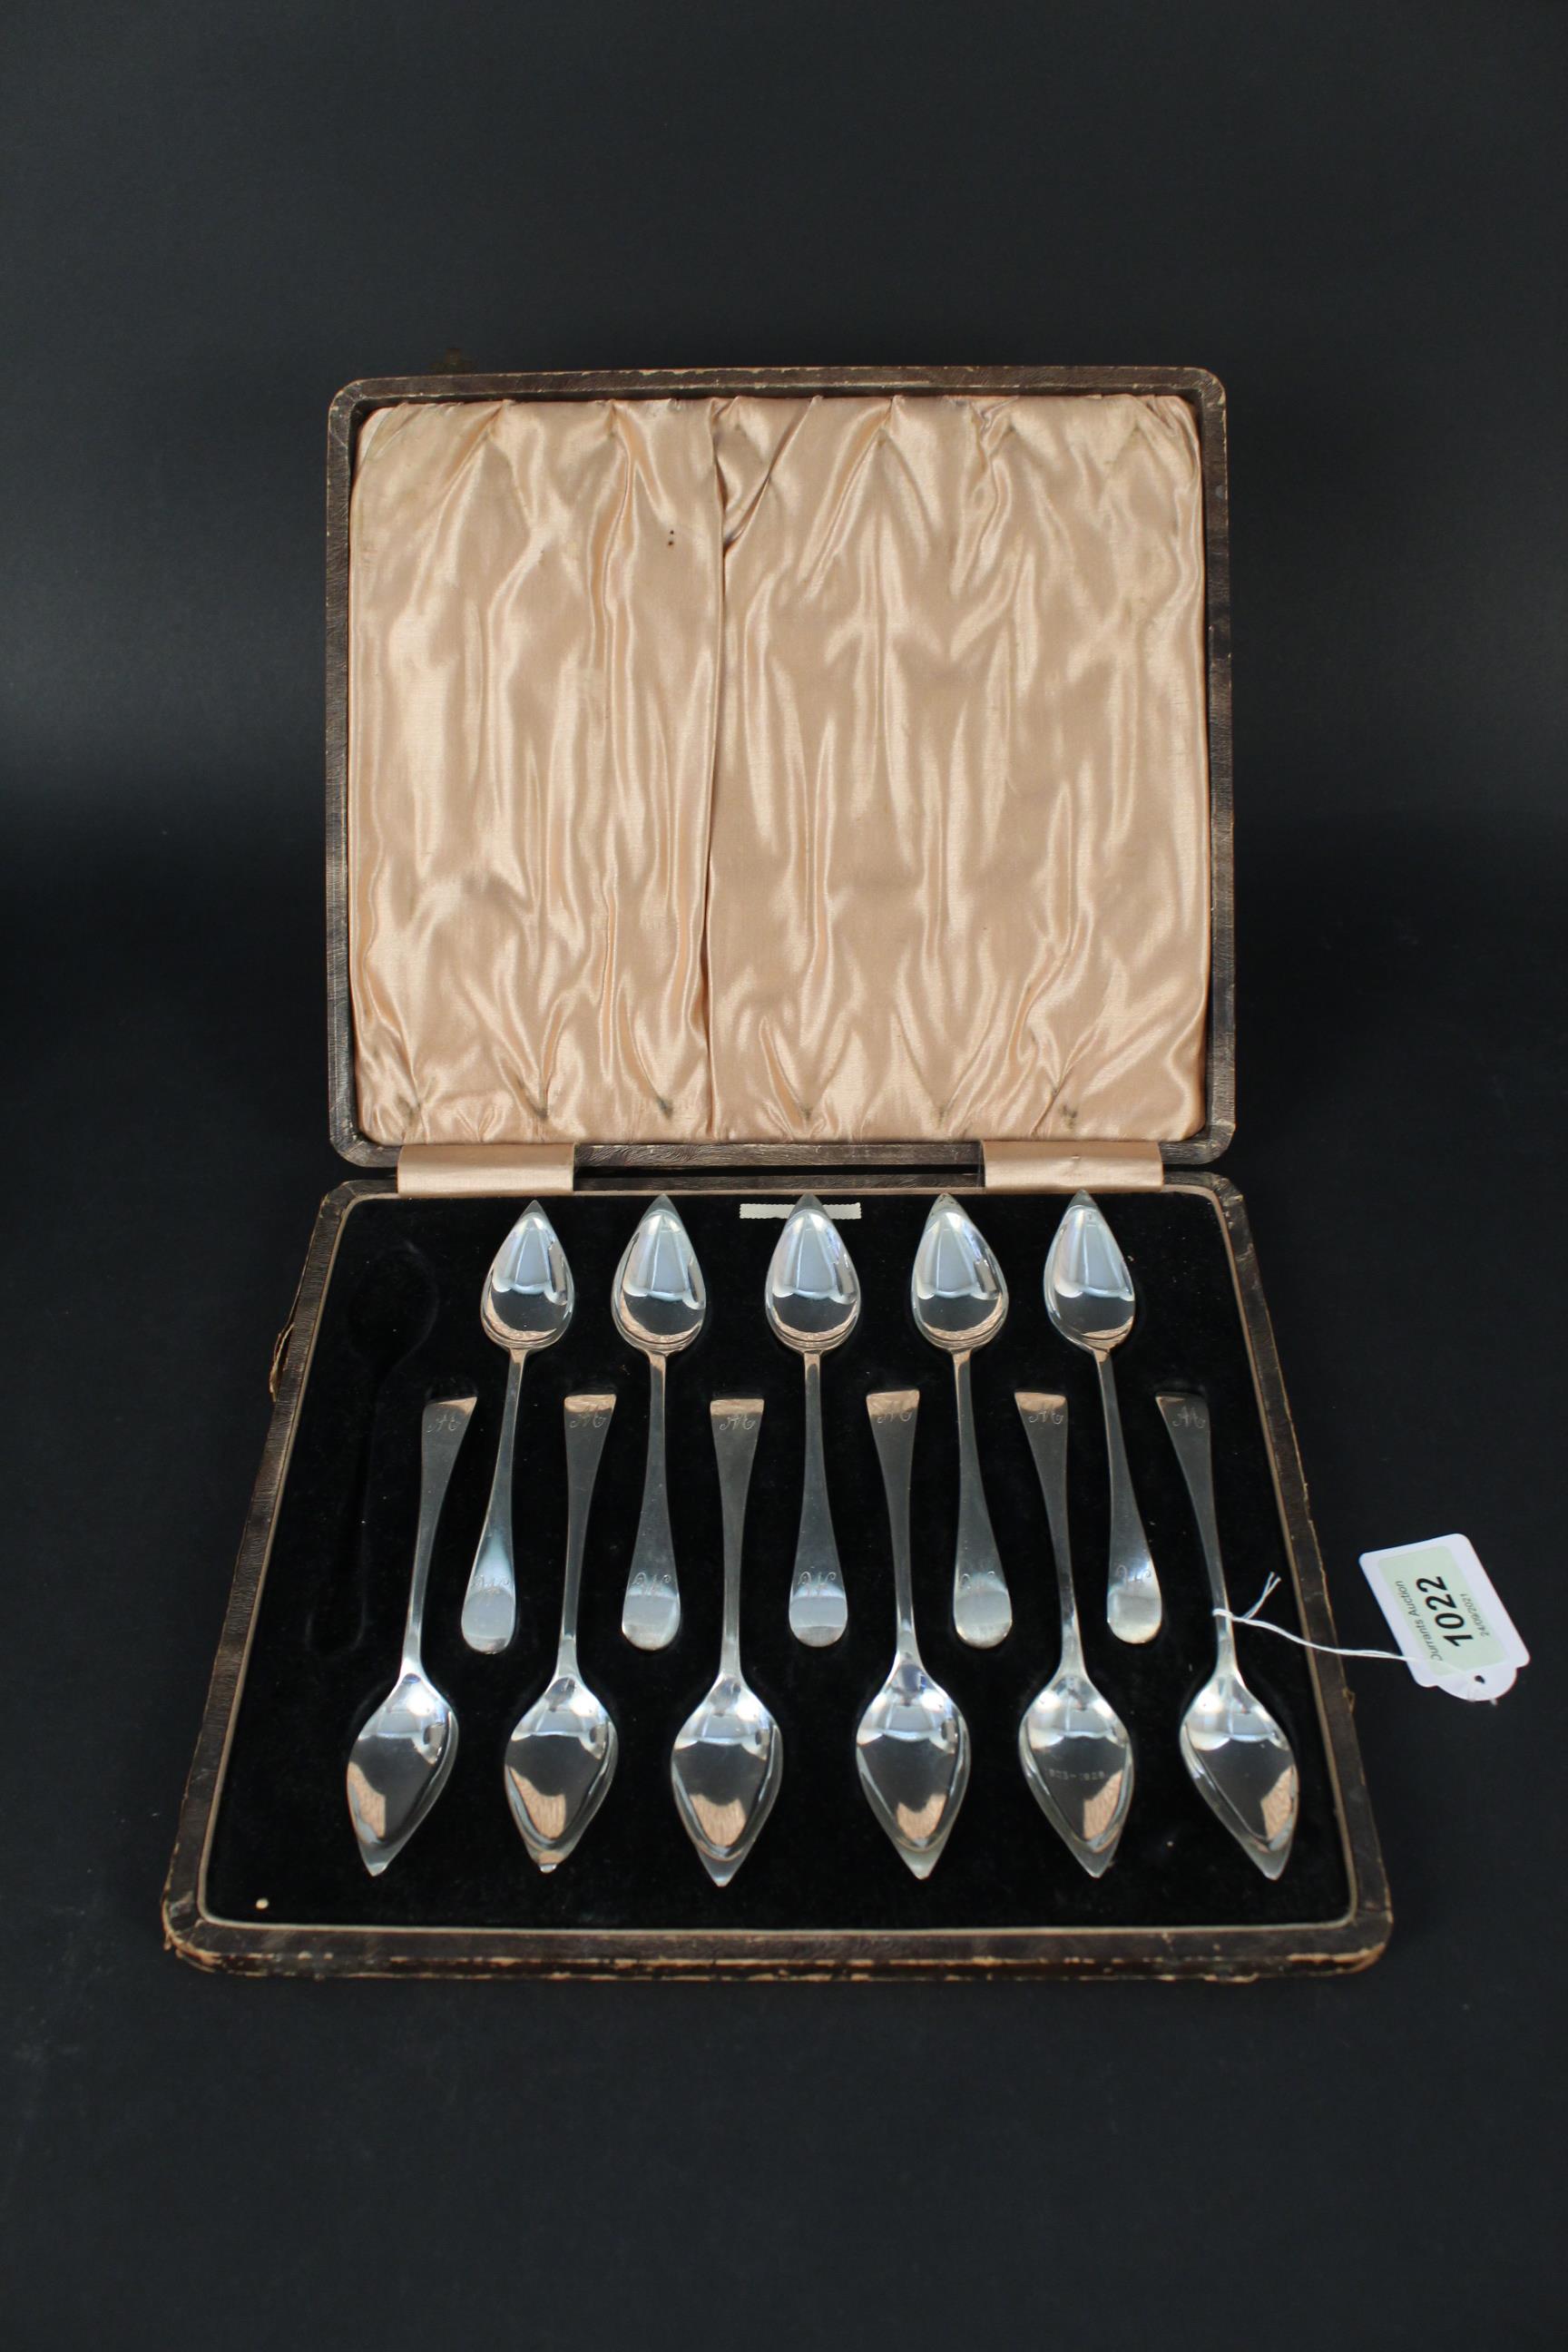 Eleven (of twelve) silver grapefruit spoons in original case, each spoon engraved with initial,